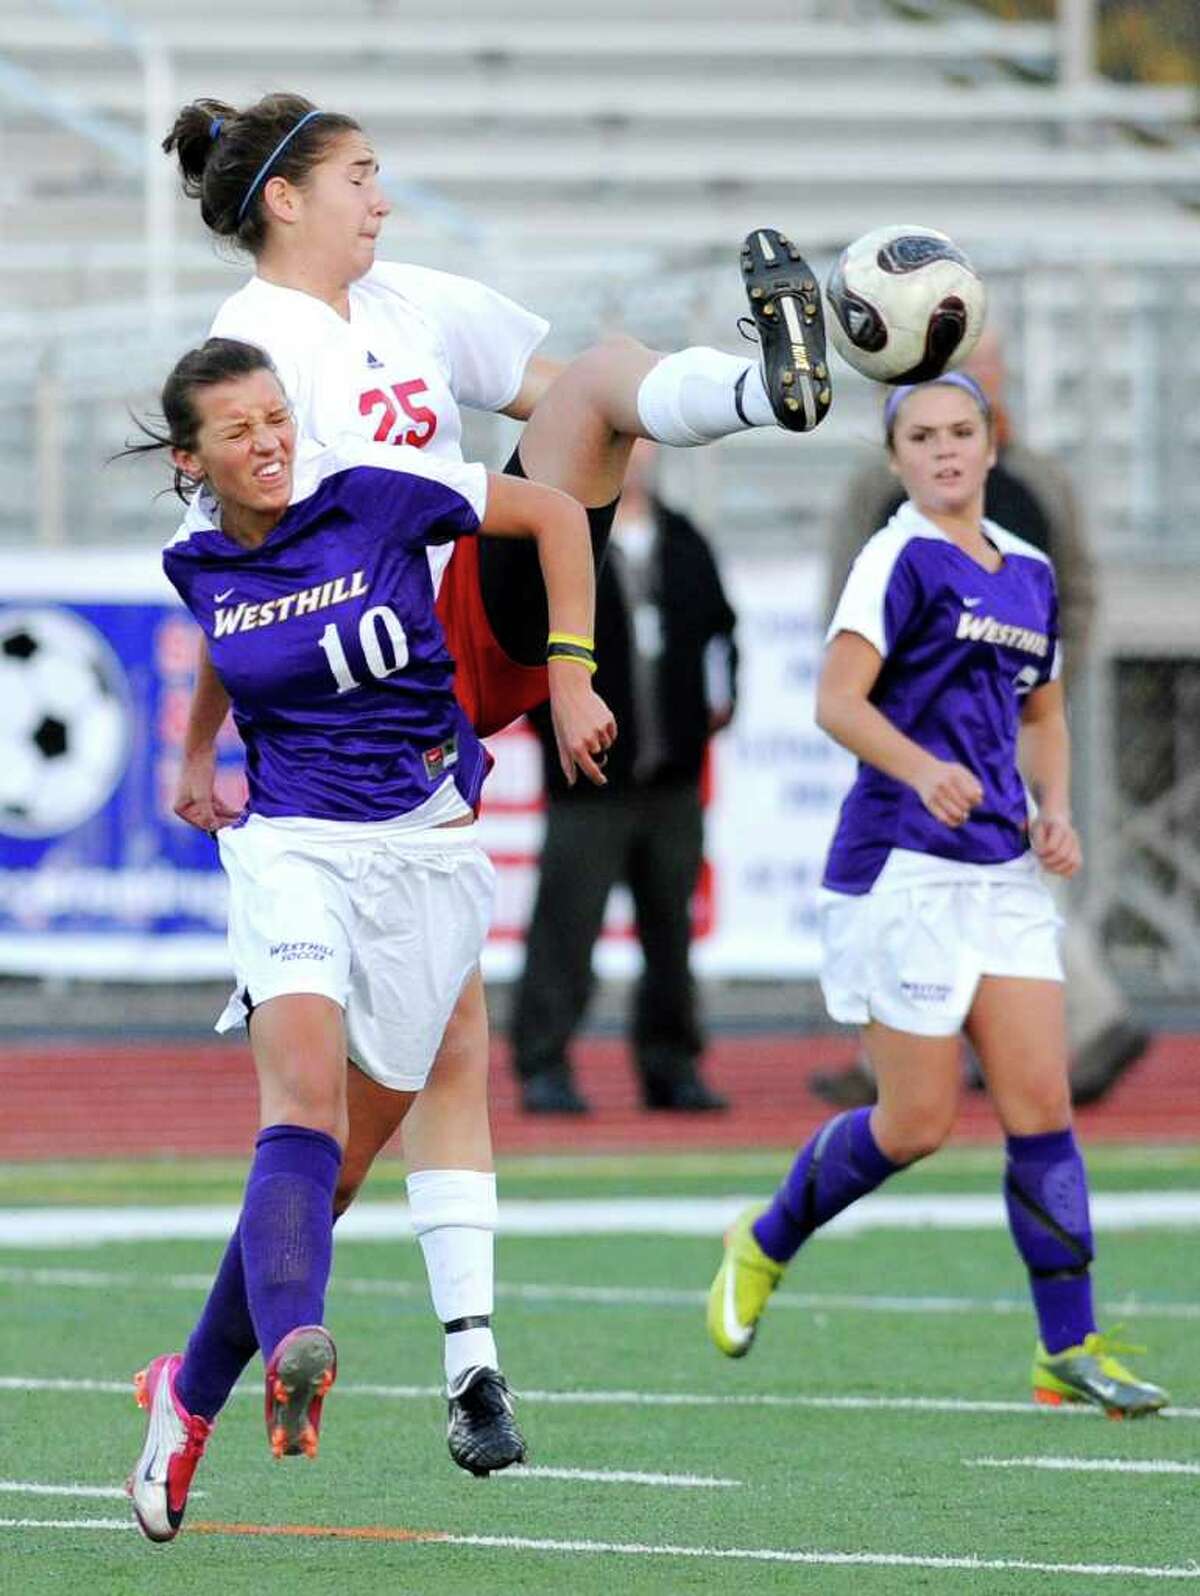 Aulona Veja, # 10 of Westhill, left, goes up against a high-kicking Sara Rosenband, # 25 of GHS, top, during the 2010 Girls FCIAC Soccer Championship between Greenwich High School vs. Westhill High School at Norwalk High School, Wednesday night, Nov. 3, 2010. Greenwich defeated Westhill, 1-0.